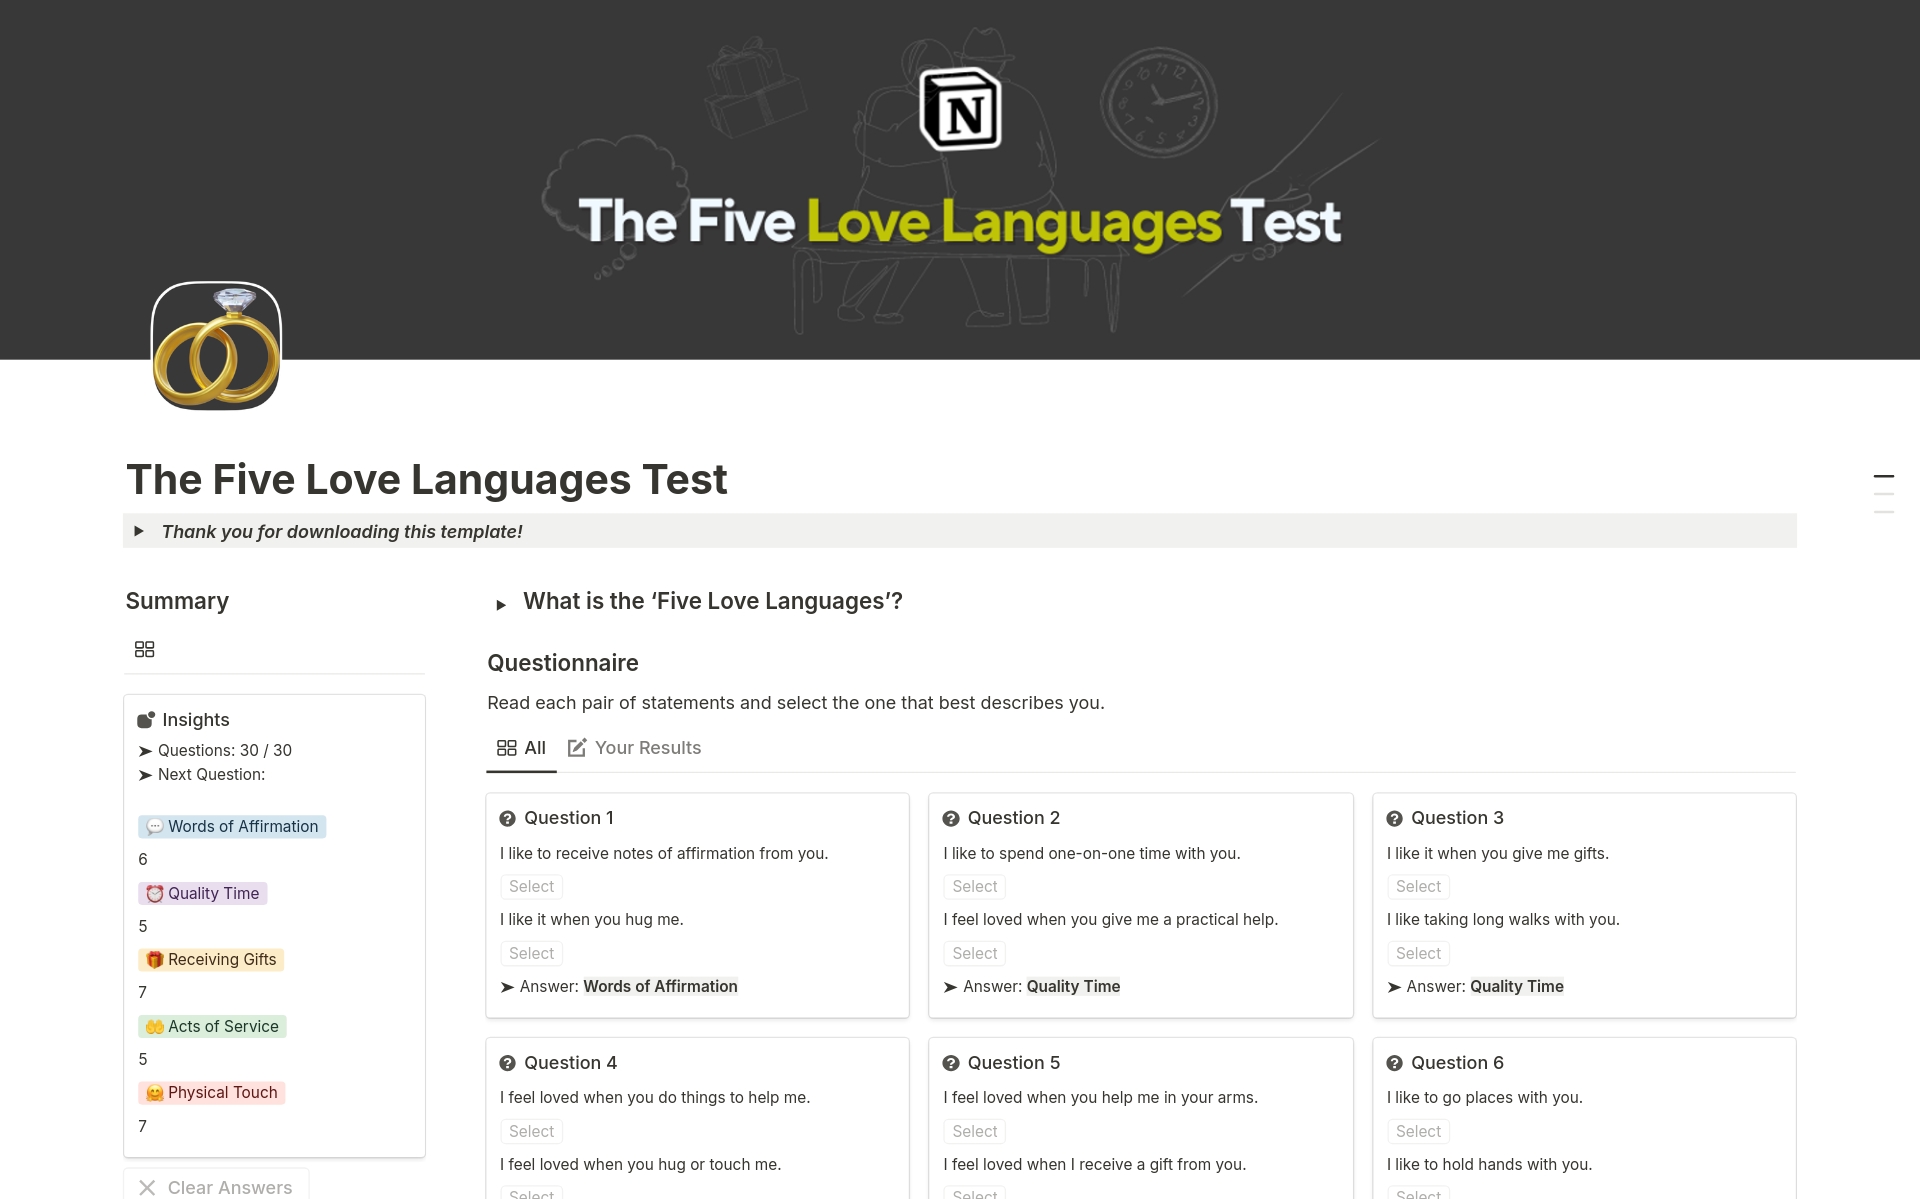 This Notion template helps you discover your primary love language based on Dr. Gary Chapman's Five Love Languages. It includes a quiz, results summary, and dynamic sorting to identify your top love language. Retake or reset your quiz with ease. Enhance your relationships through